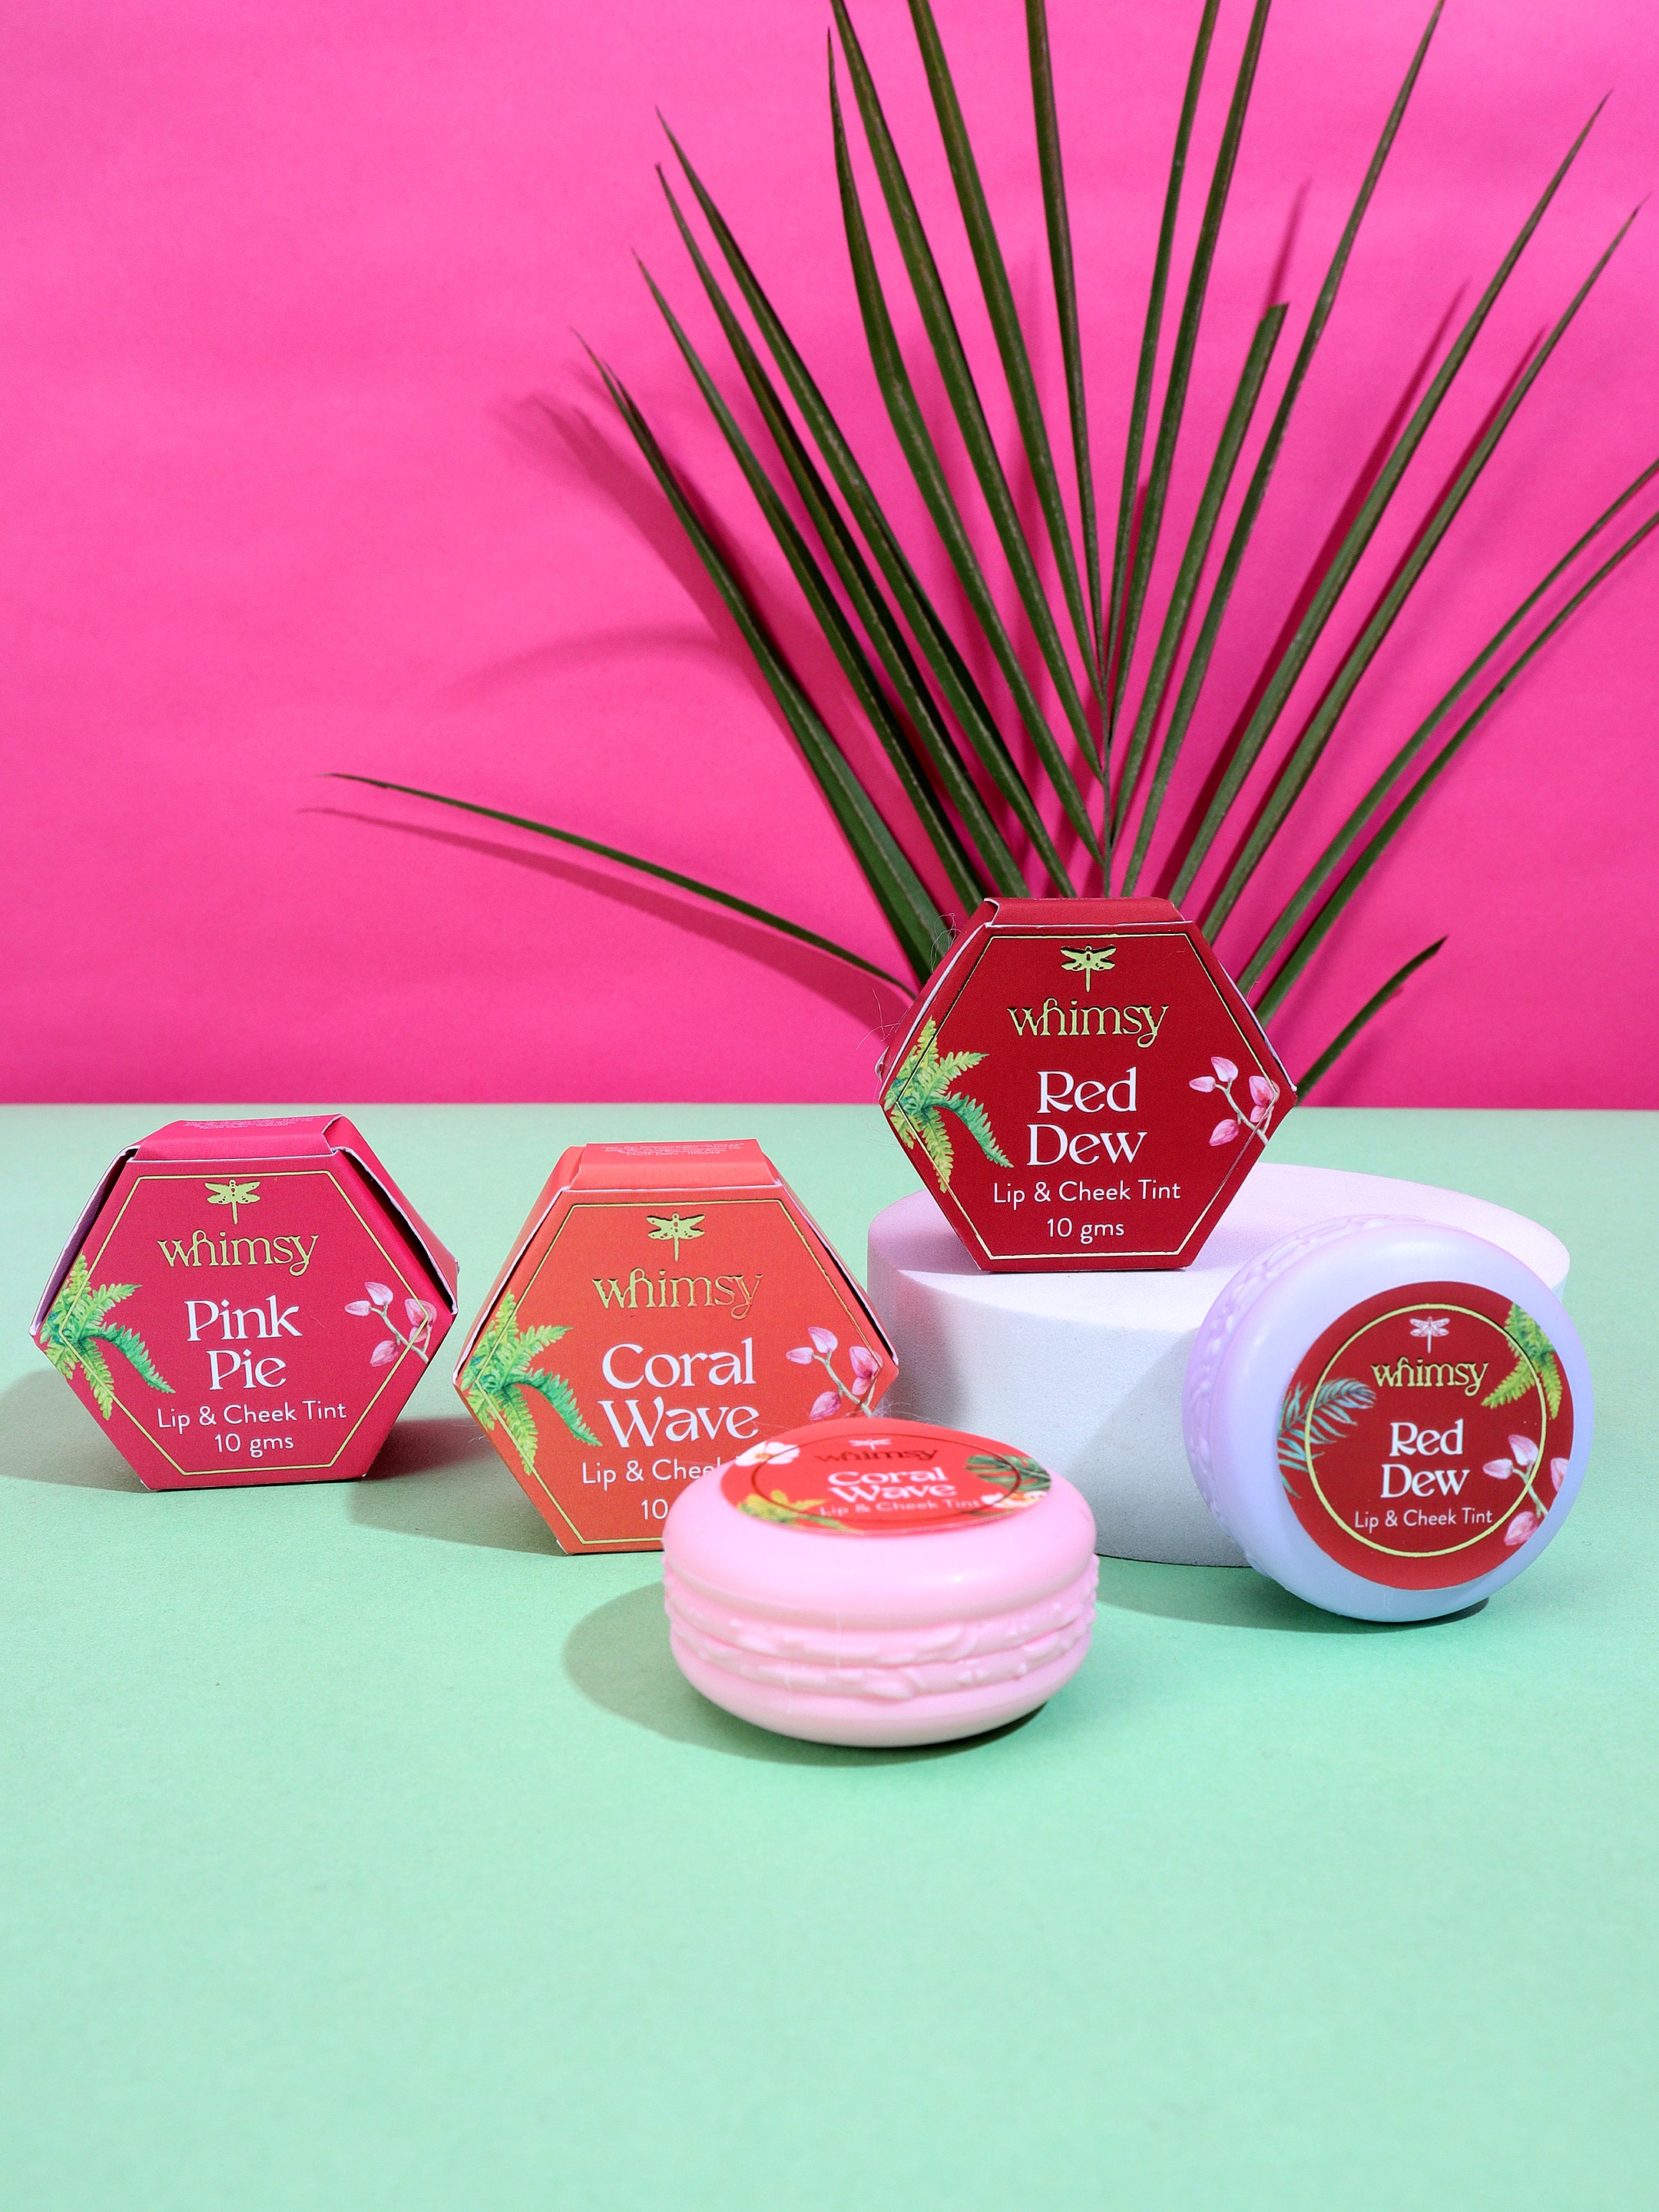 Combo of Lip & Cheek Tints - Pink Pie, Coral Wave and Red Dew For Teen and Preteen Girls